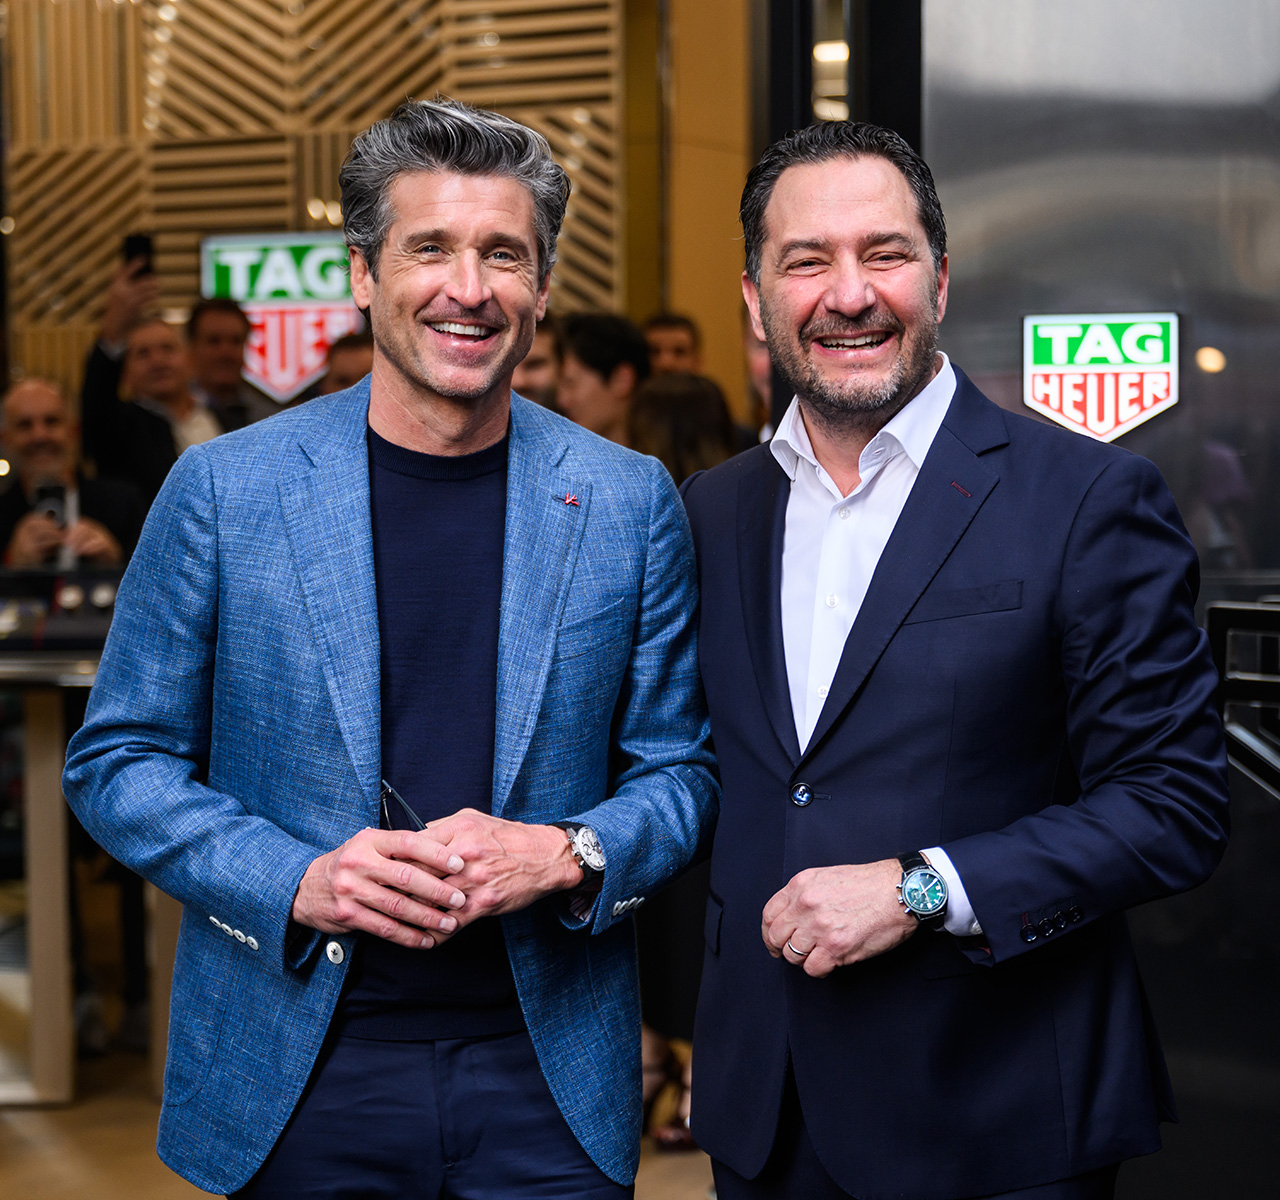 TAG Heuer, watches, patrick dempsey